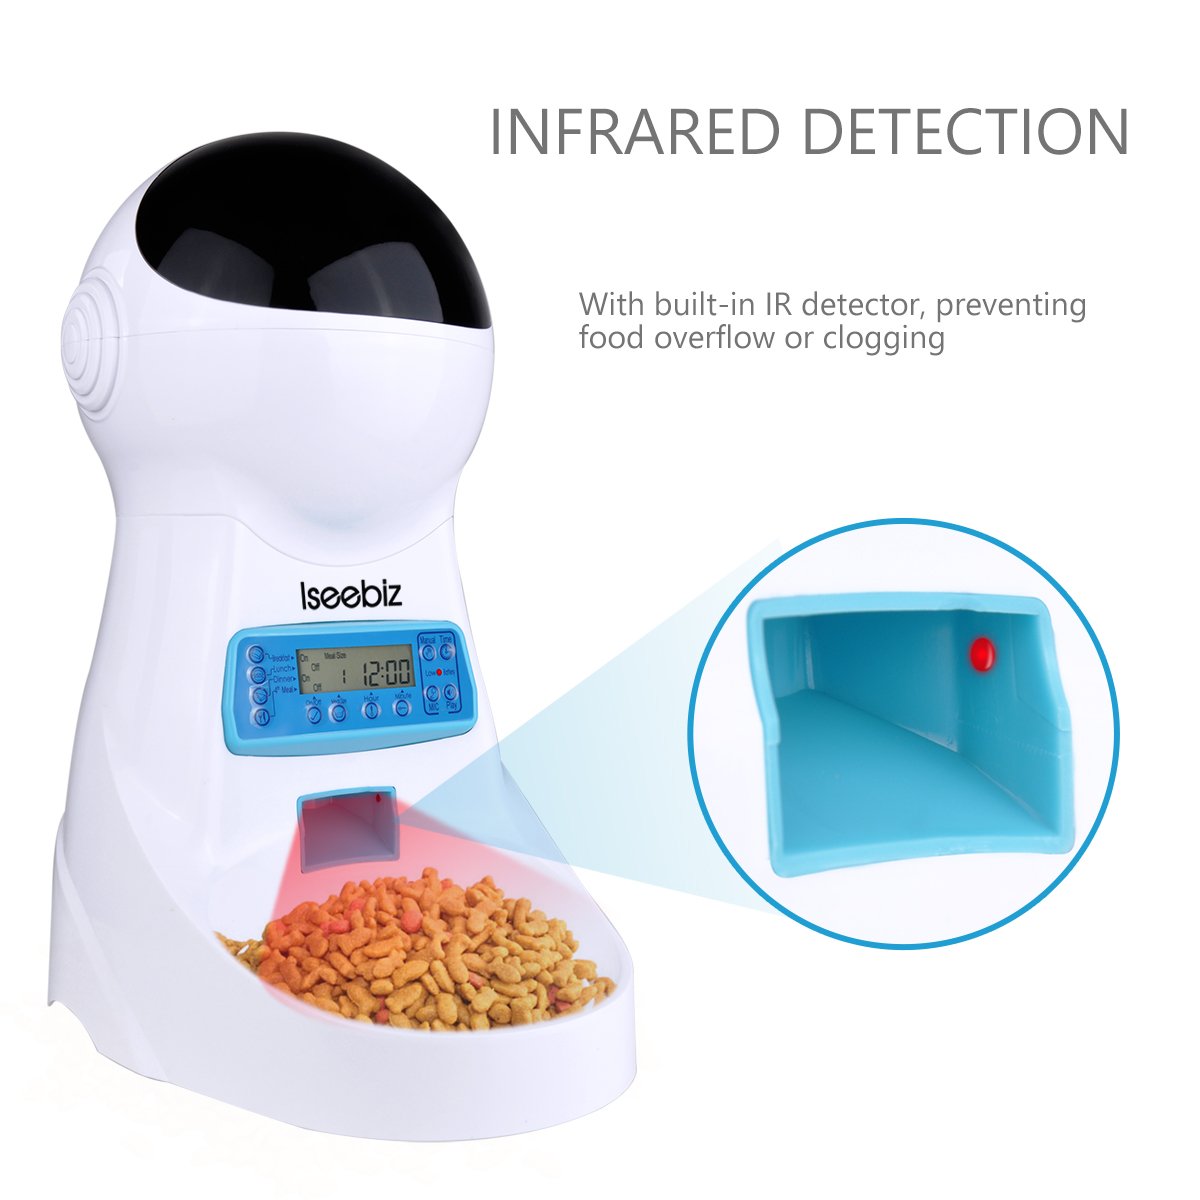 LCD Screen Automatic Pet Feeder with Voice Record